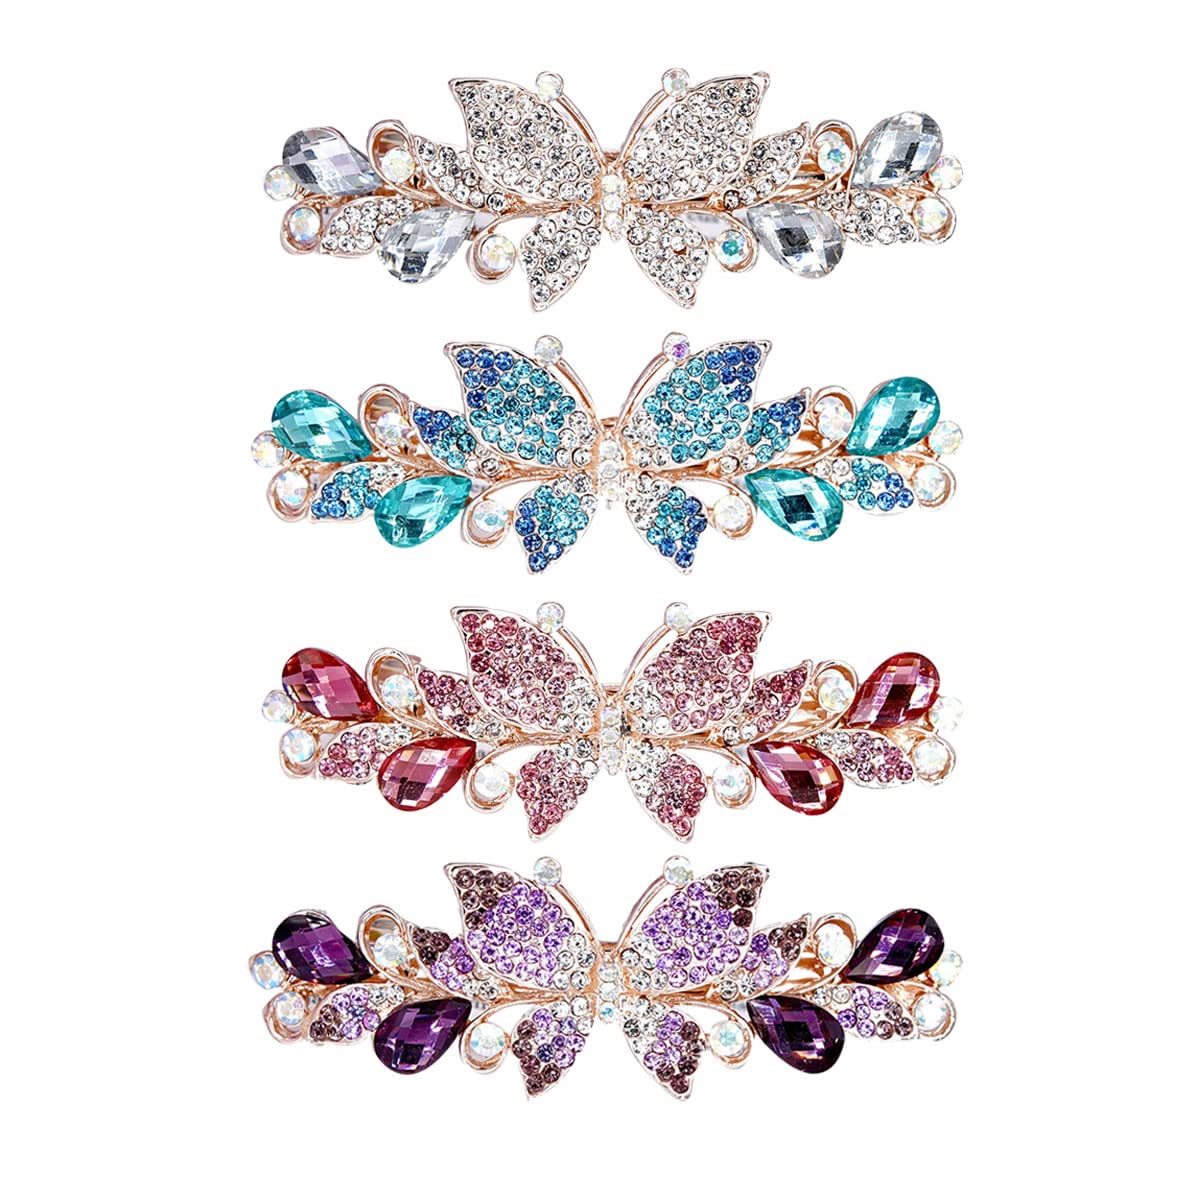 inSowni 4 Pack Luxury Glitter Sparkly Jeweled Gems Crystal Rhinestone Butterfly Metal French Hair Barrettes Fancy Bling Alligator Snap Butterflies Hair Clips Headpieces Accessories for Women Girls